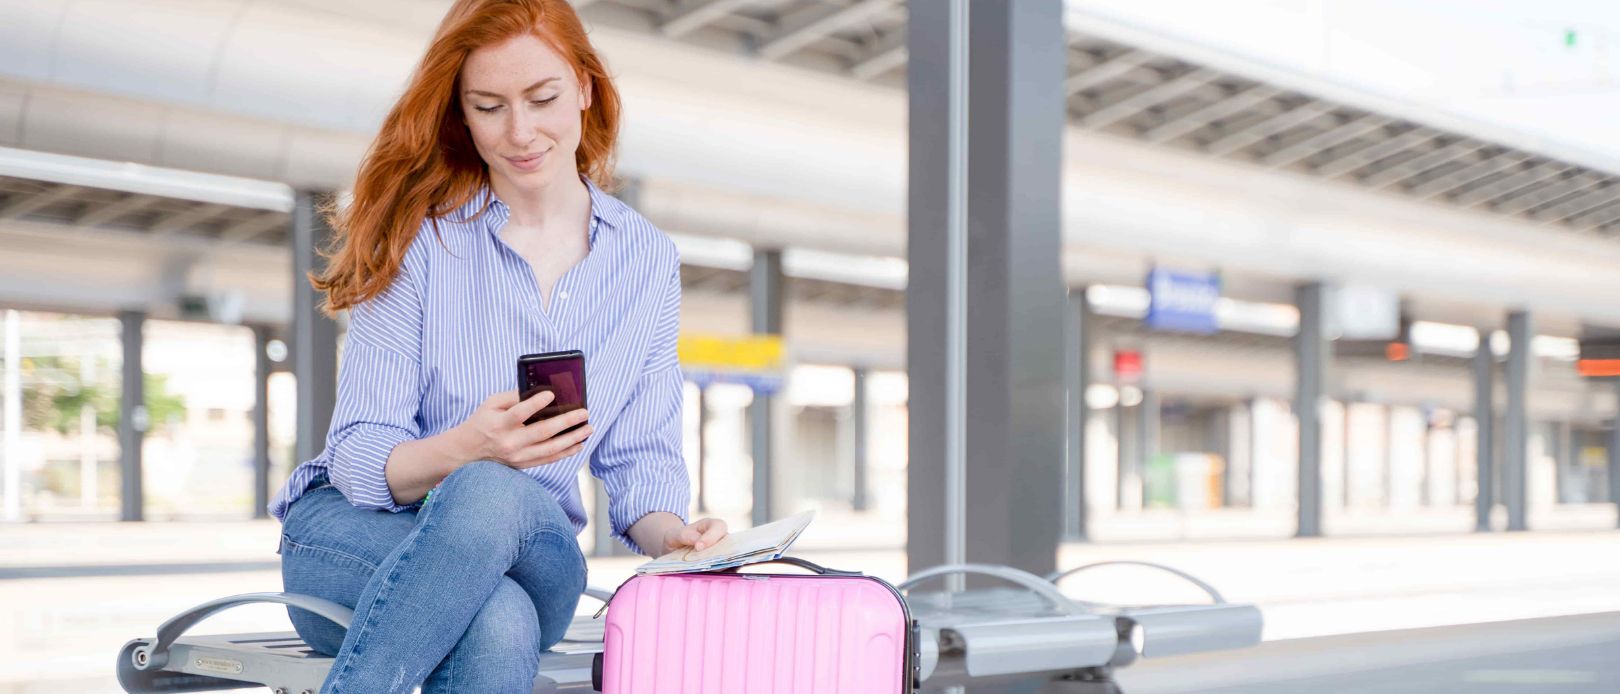 Young woman holding cellphone sitting in train station platform